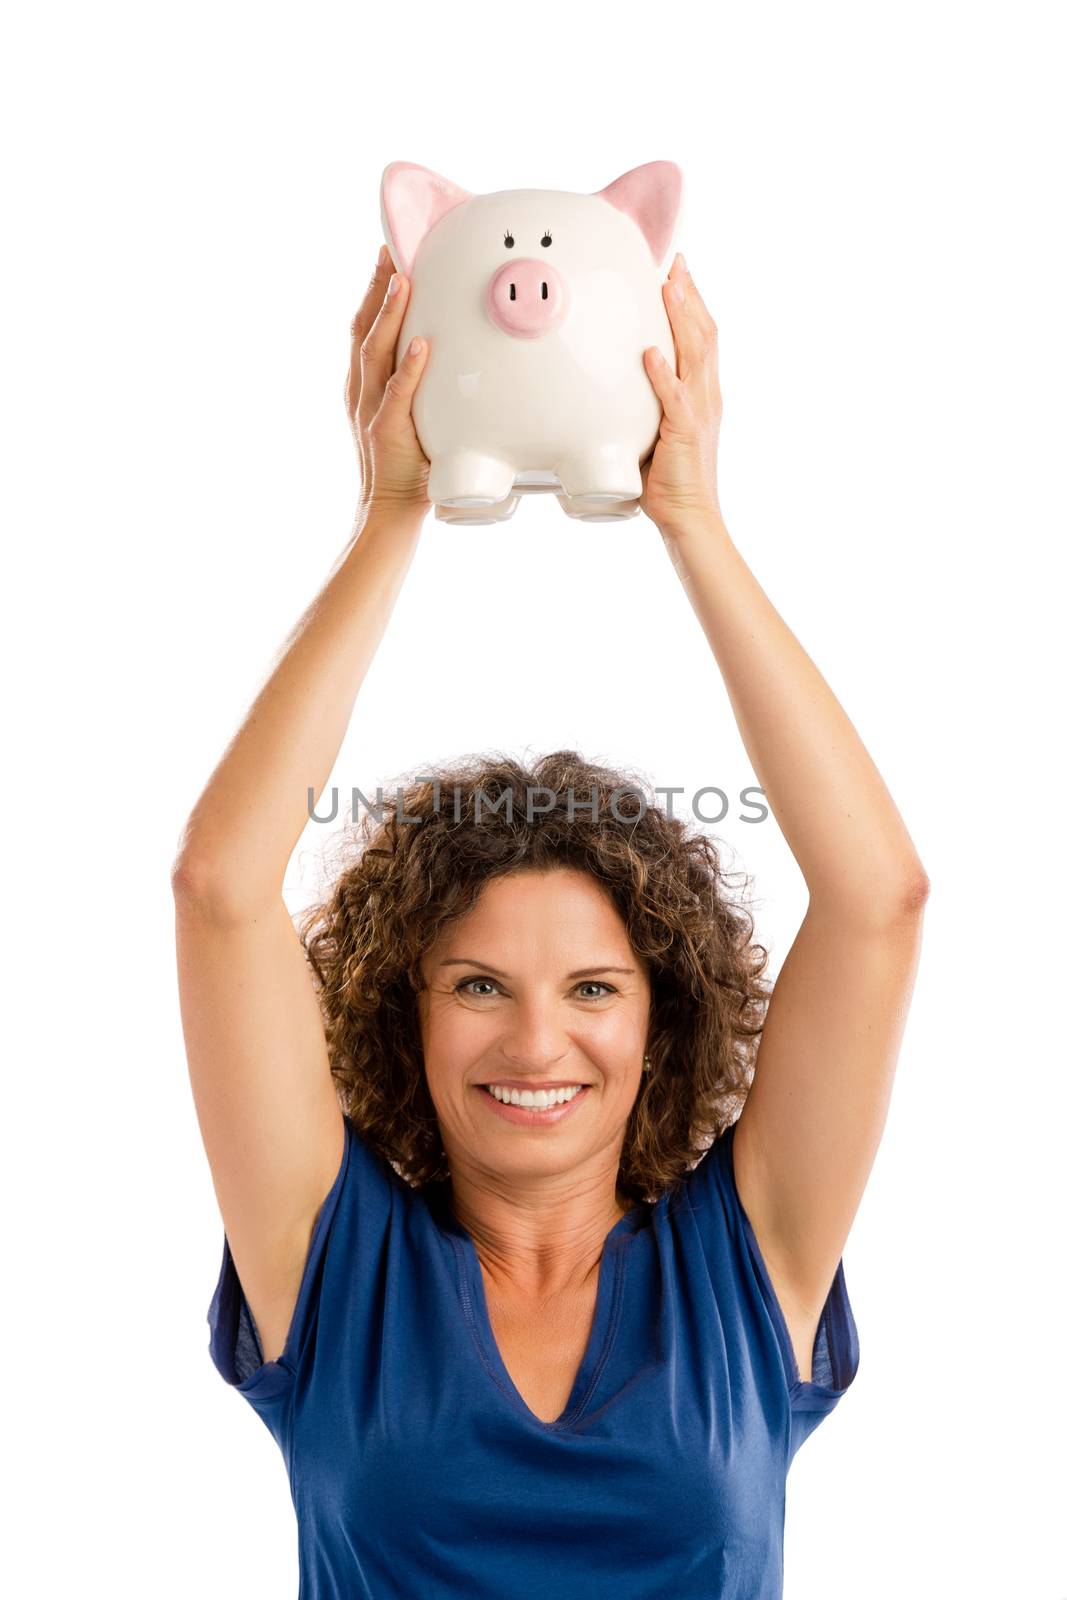 Portrait of a happy middle aged woman holding a Piggybank over her head